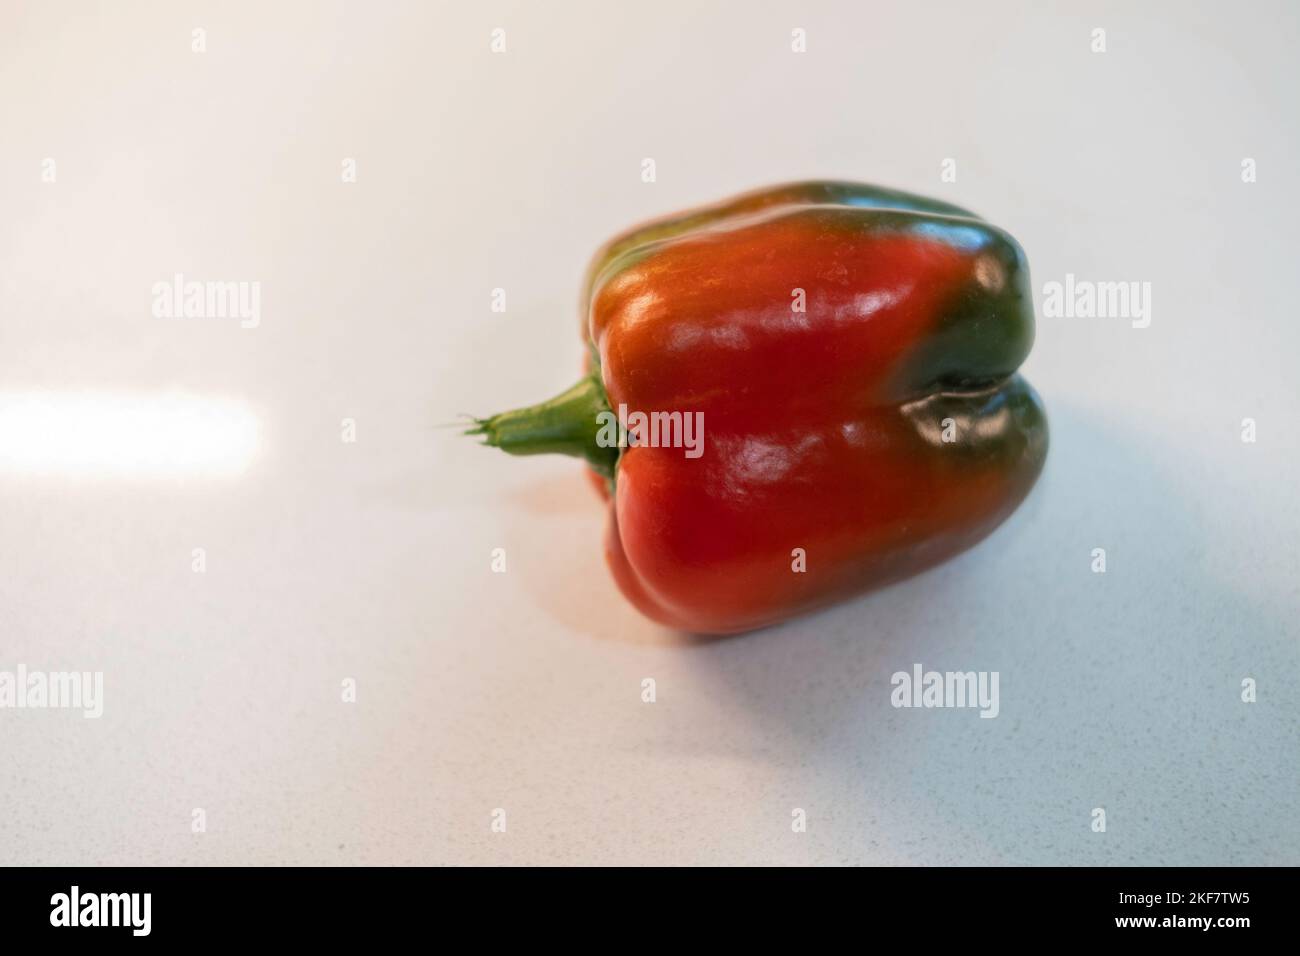 A single red bell pepper, Capsicum annuum, on a white background. Stock Photo